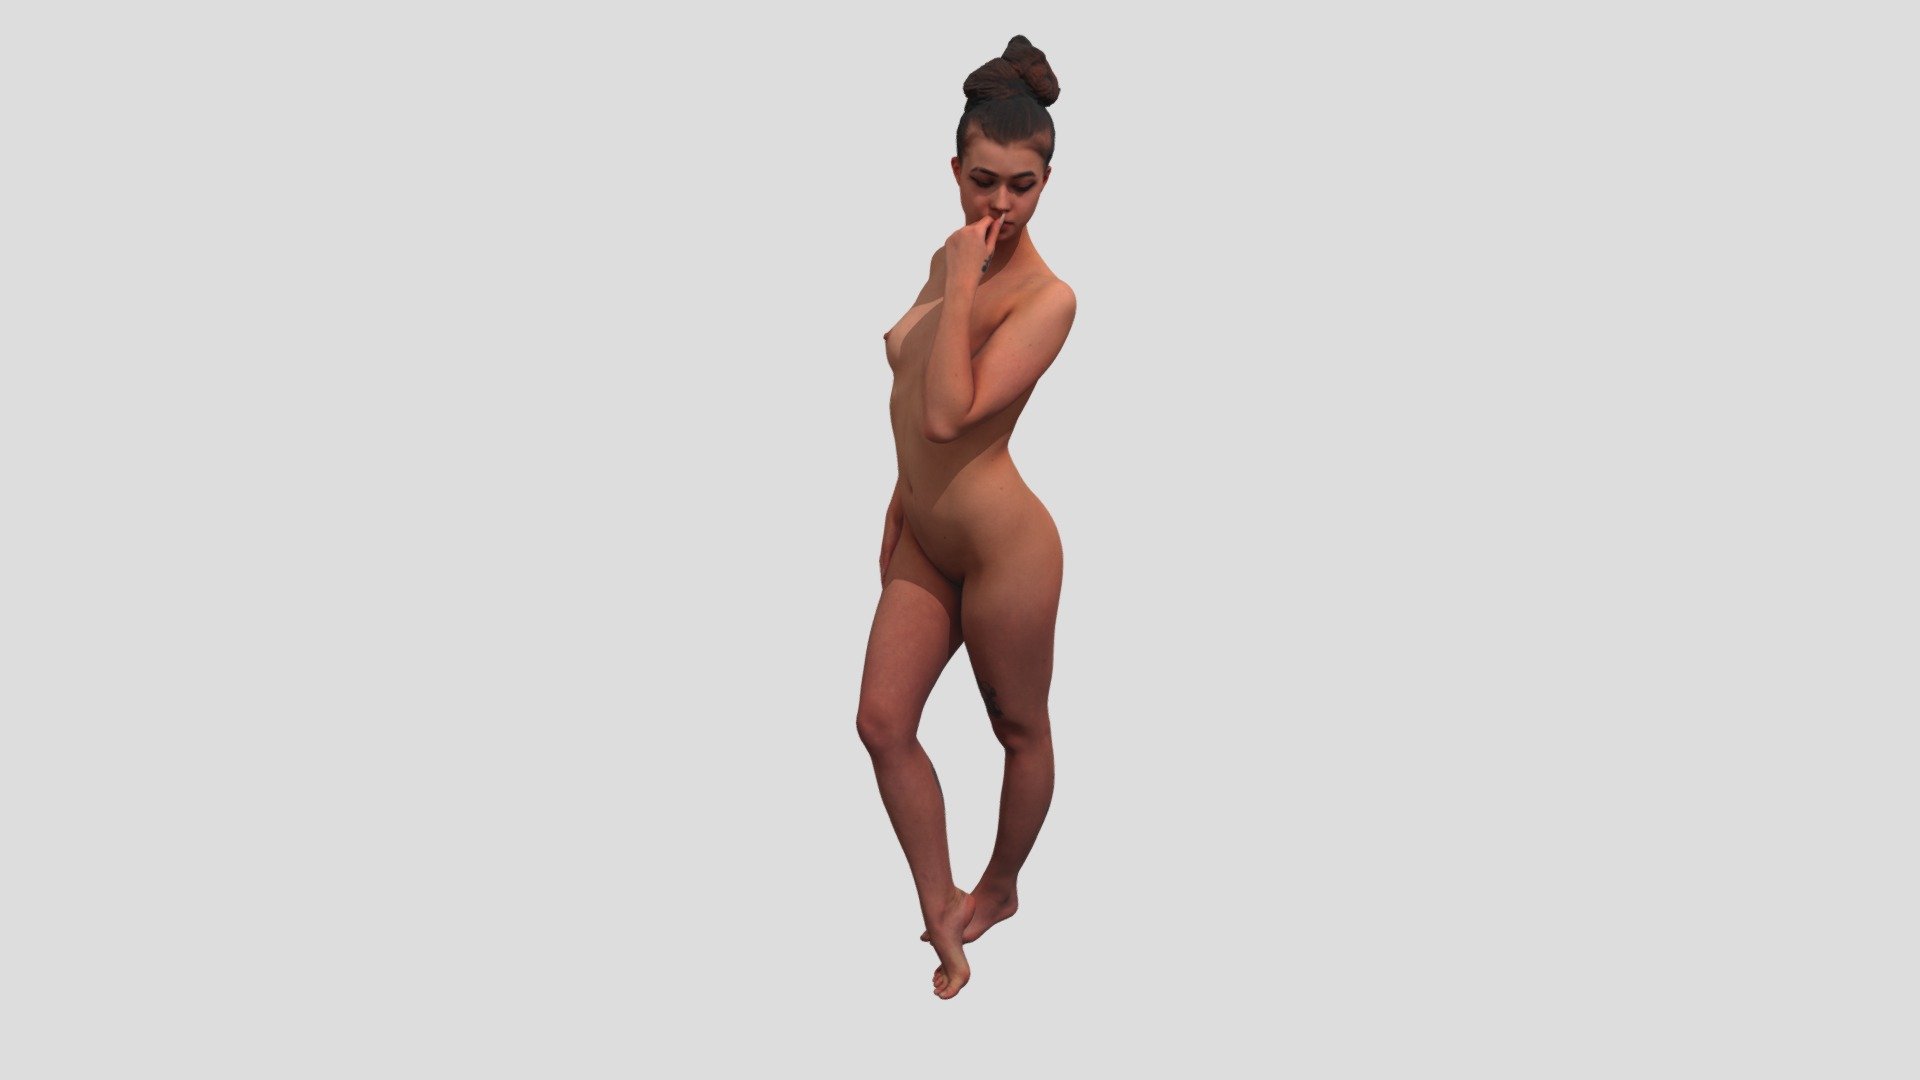 Real Life Human Scans is a project by 3Dsk which focus on diversity of human bodies, faces and expressions.

Ethnicity: white
Gender: female
Age: 18
Height: 173 cm
Weight: 58 kg

Technical Specifications:




OBJ file / 751 000 polys

8k / PNG diffuse texture

NOTE: This is a cleaned raw scan in Zbrush postproduction but no retopology.
This is the version with less poly without Zbrush file.

3Dsk Store provides all you need for 2D&amp;3D artist and game developers. Explore raw 3D scans &amp; retopologized models of head, hand, full body in A-pose or daily pose and props. And a variety of 2D references such as Photo set of standing and sitting man/woman, flexing &amp; expressions. Premade head texture, HD skin and HD eye details 3d model